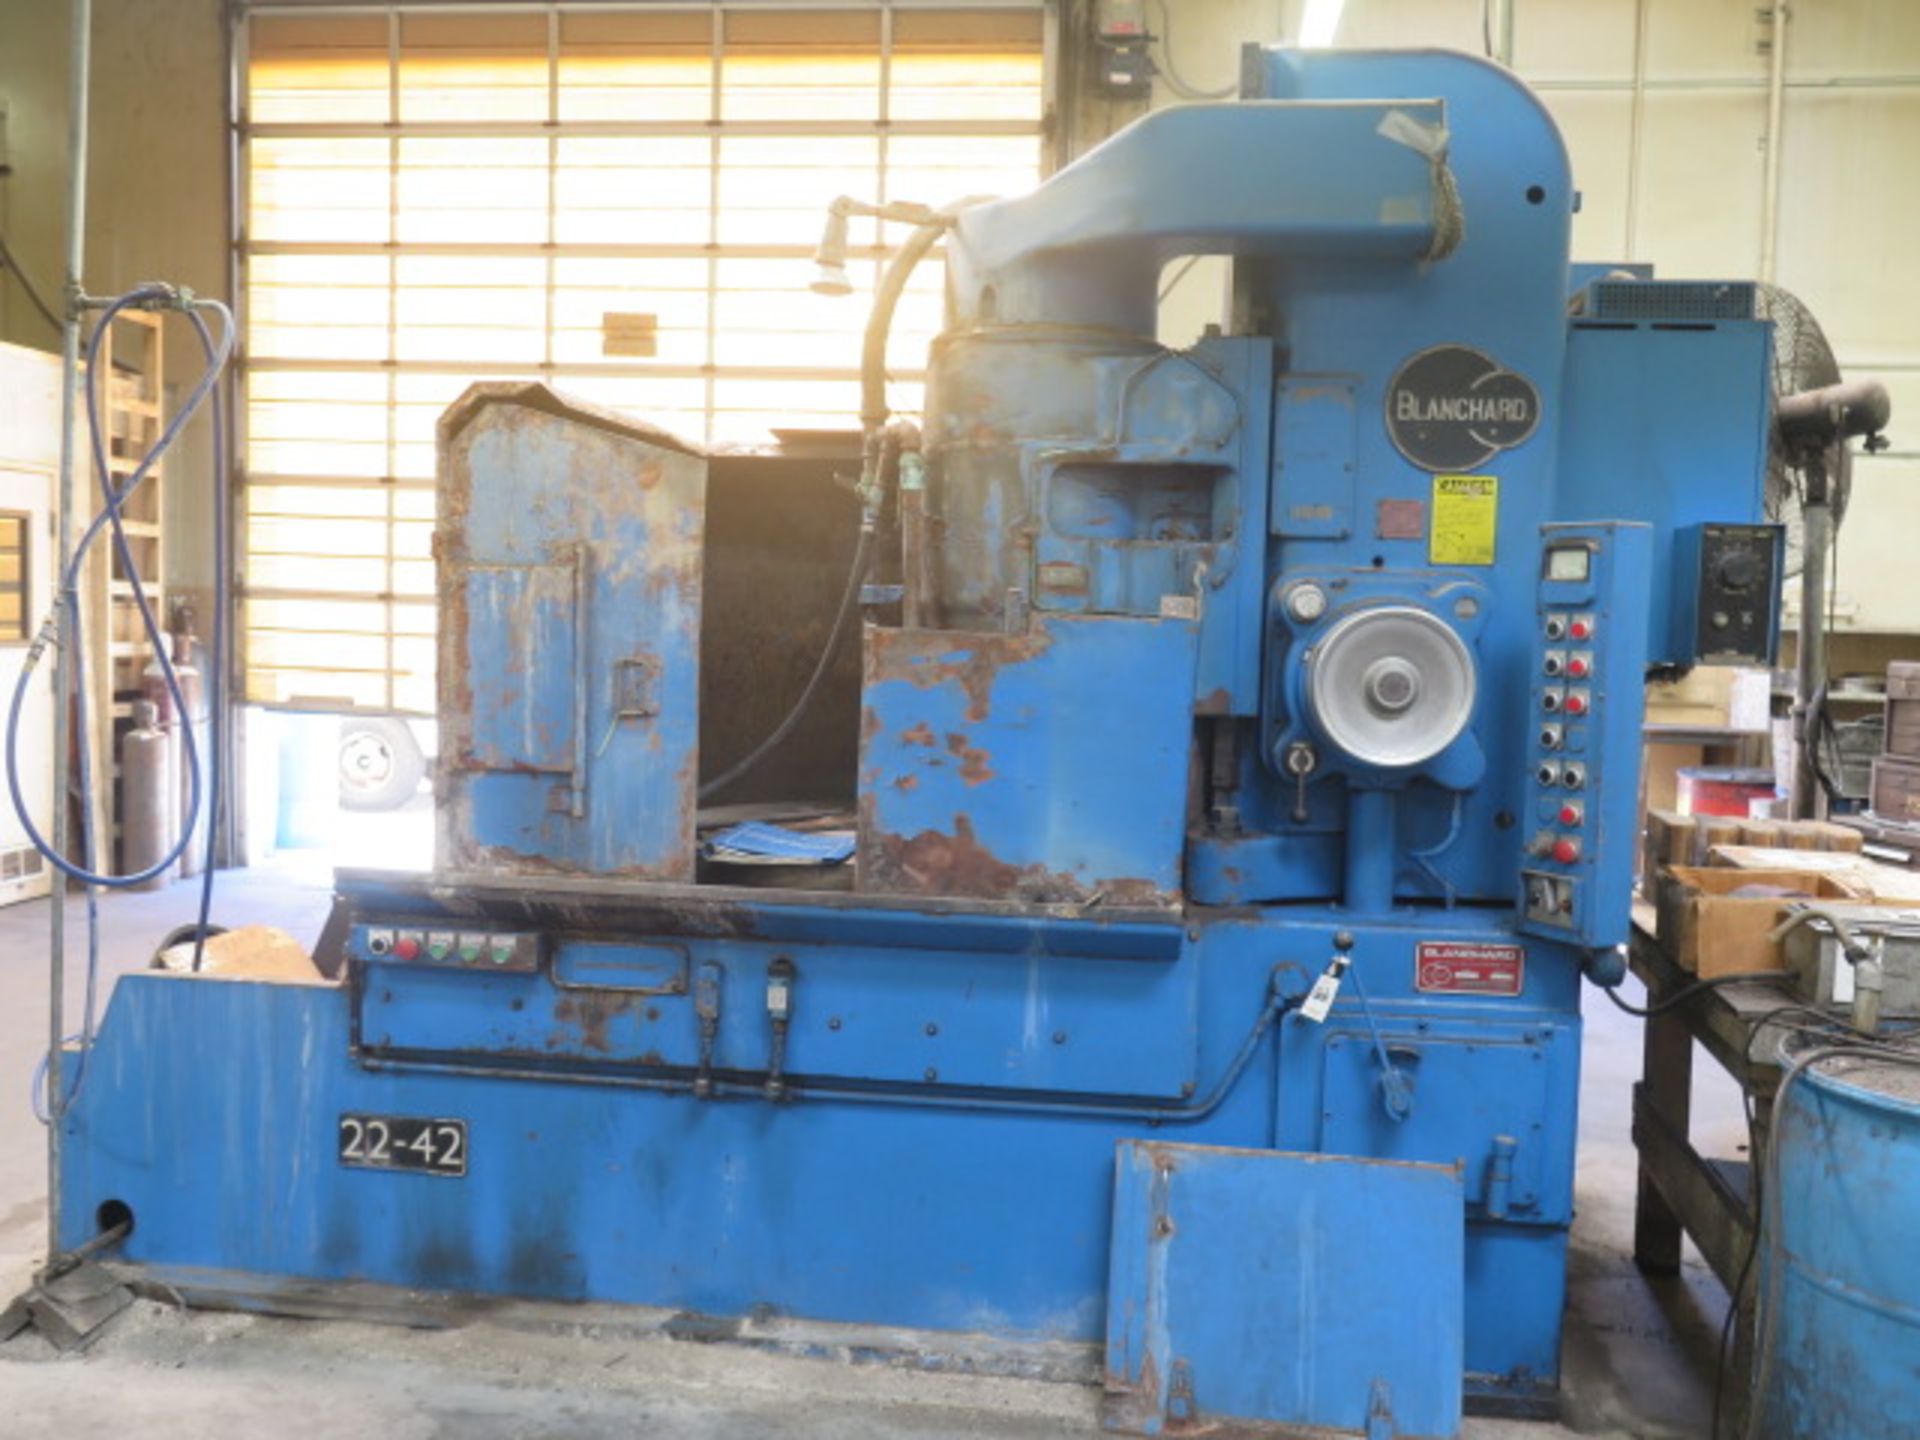 Blanchard 22-44 42” Blanchard Grinder (Rotary Surface Grinder) s/n B43-11-610 w/ 6-33 Table RPM, 42”